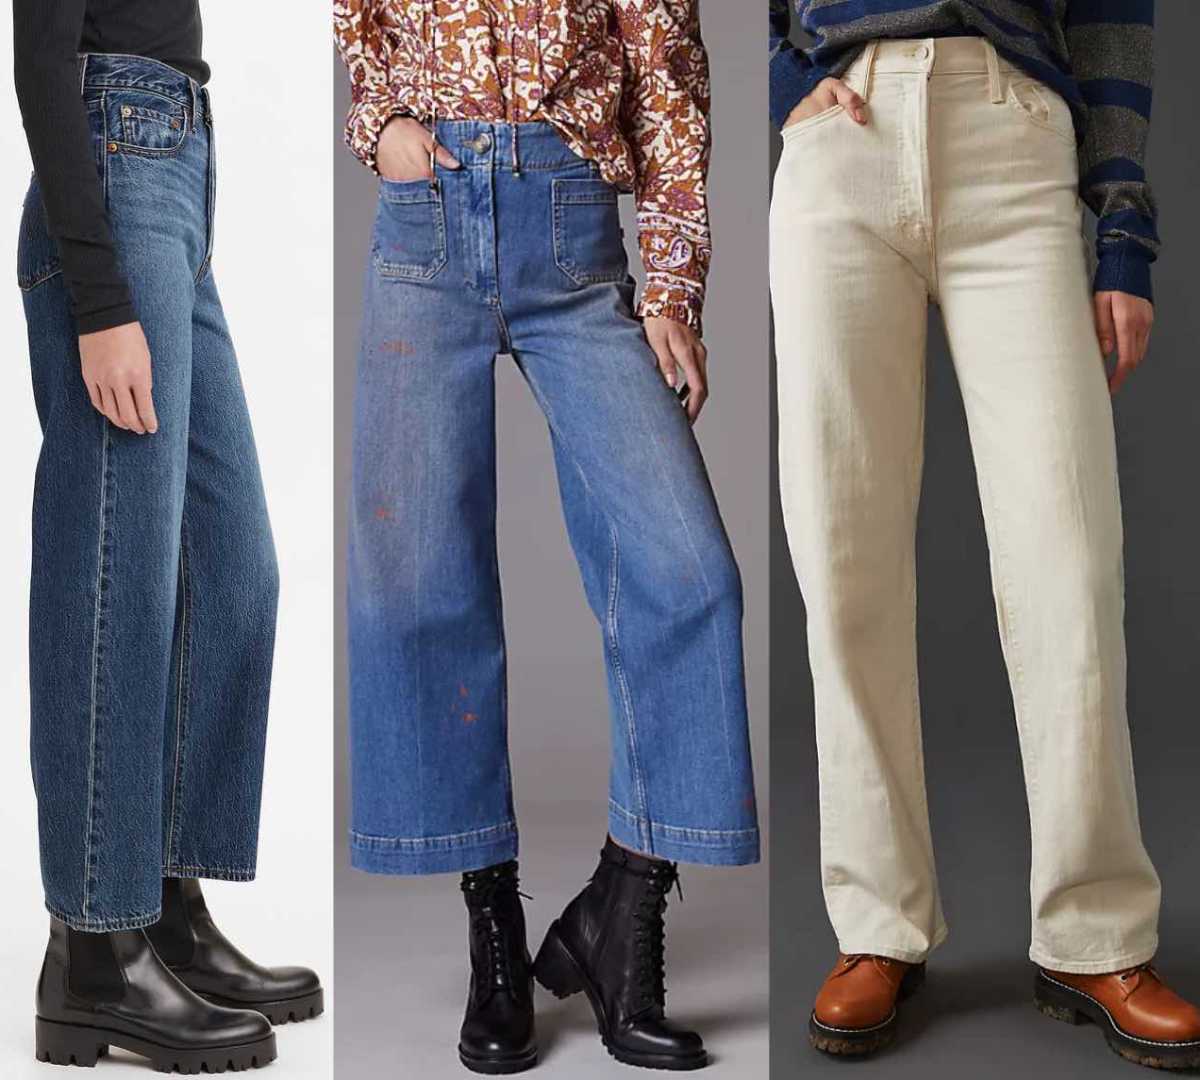 3 women wearing different wide leg jeans with combat boots.